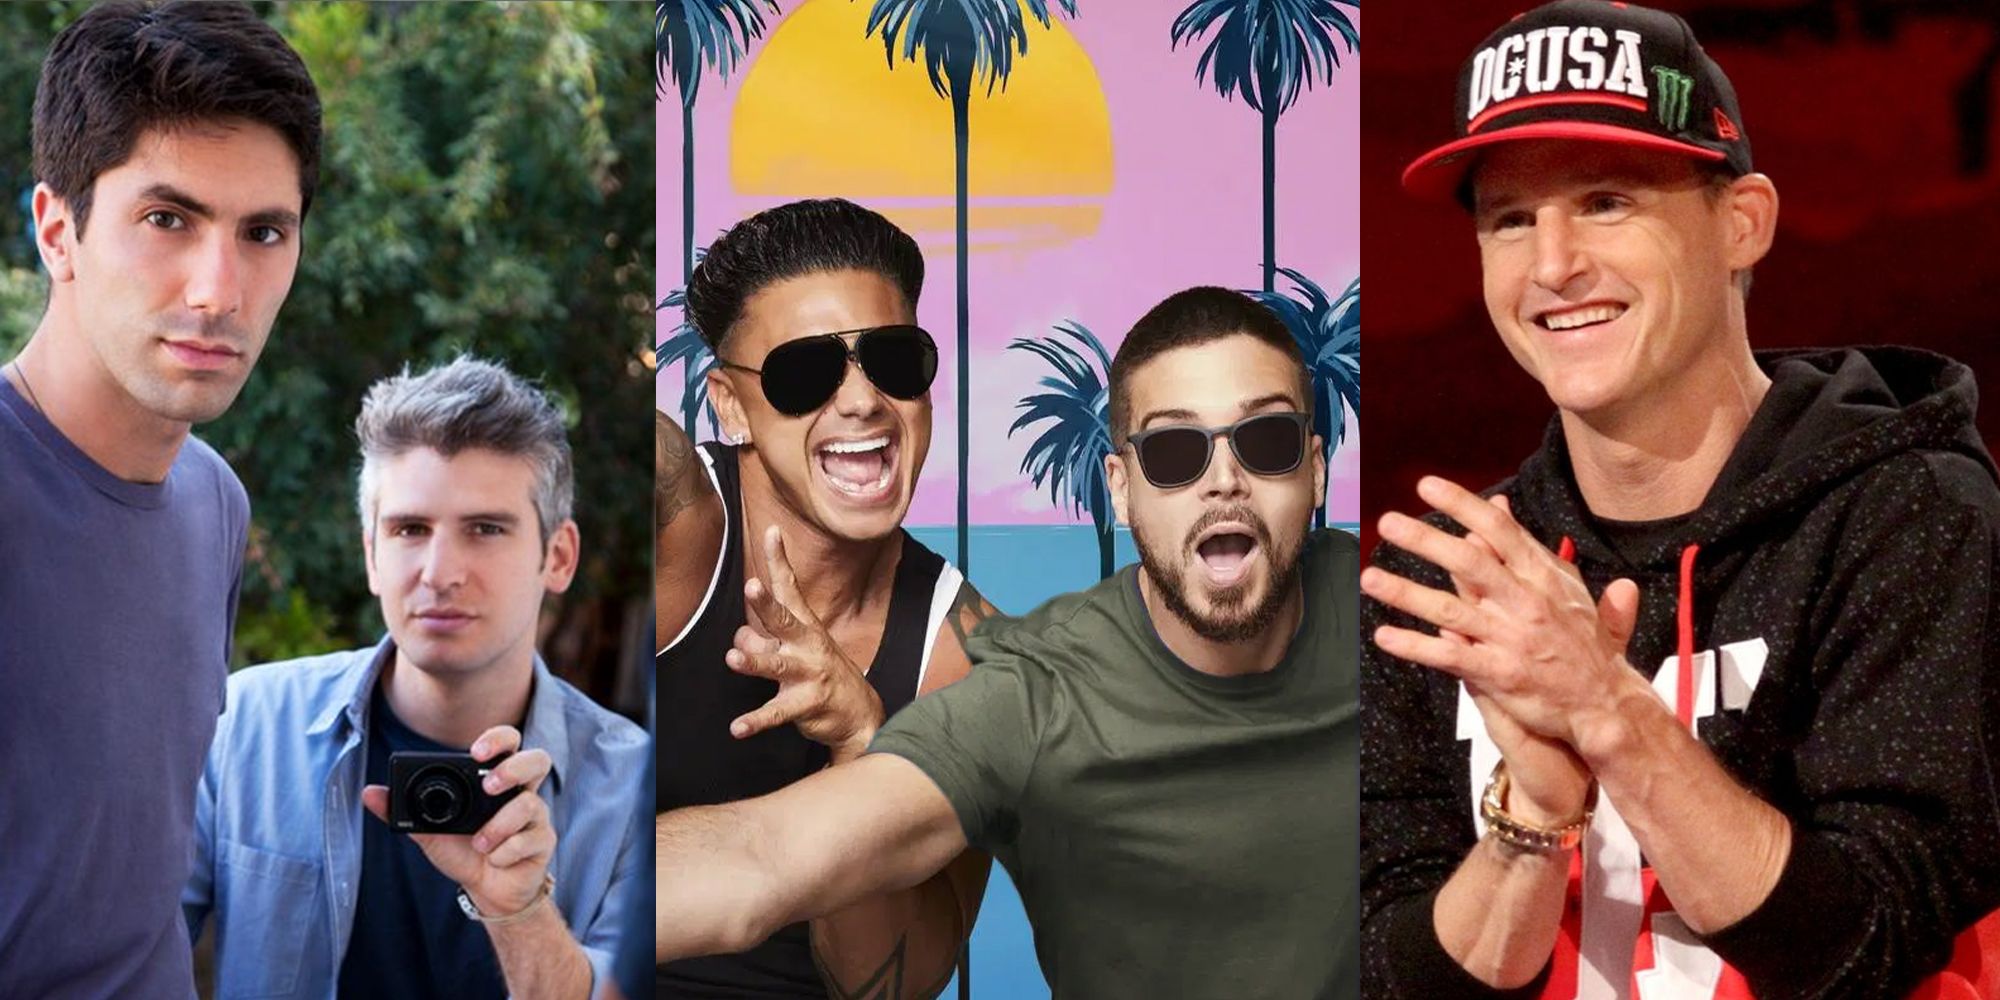 An image of Max and Nev of Catfish, Vinny and Pauly D of Jersey Shore Family Vacation, and Rob Dyrdek of Ridiculousness